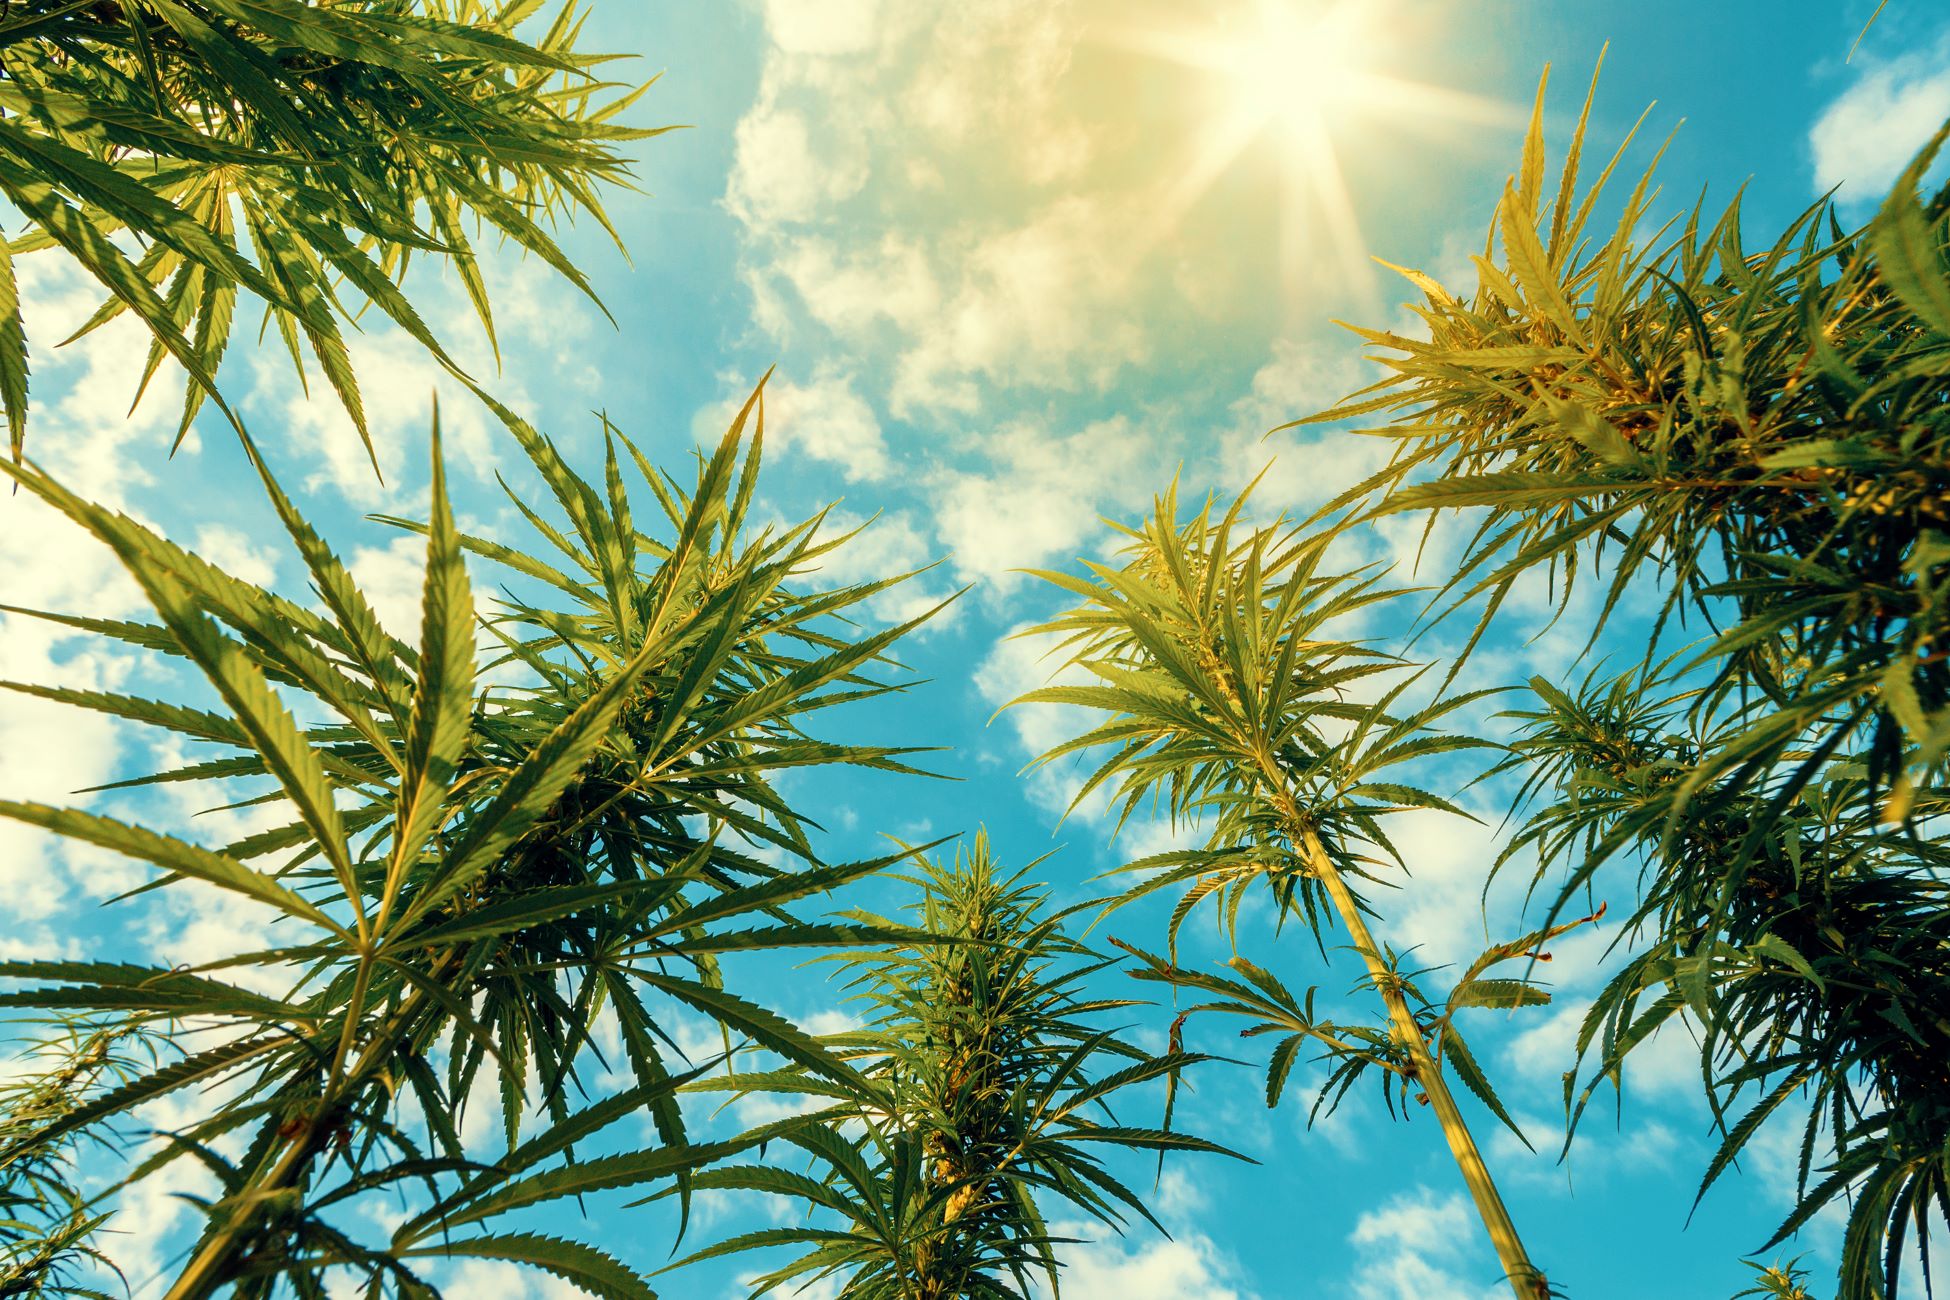 Viewing cannabis plants from below looking up into a bright sky